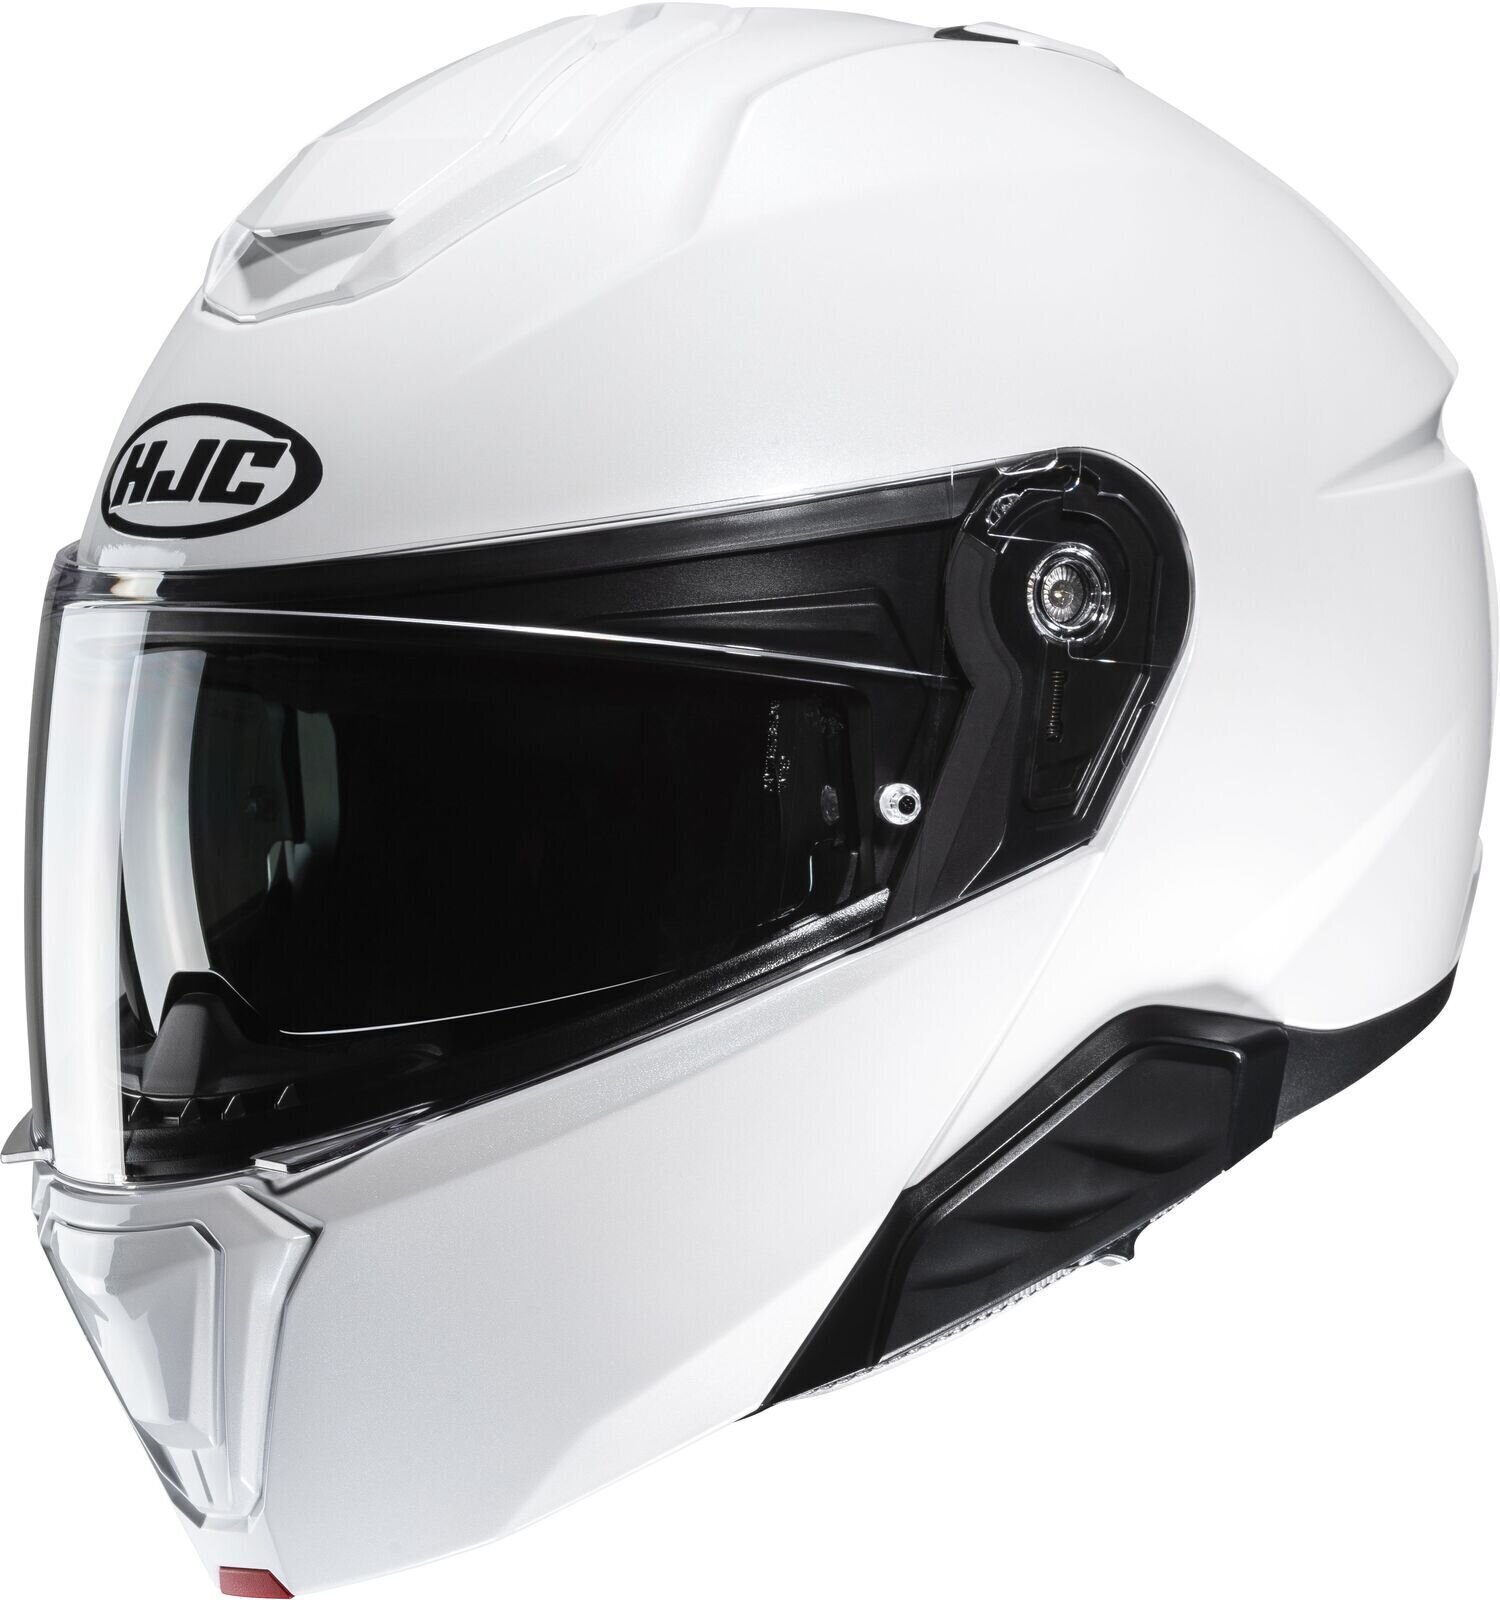 Kask HJC i91 Solid Pearl White S Kask